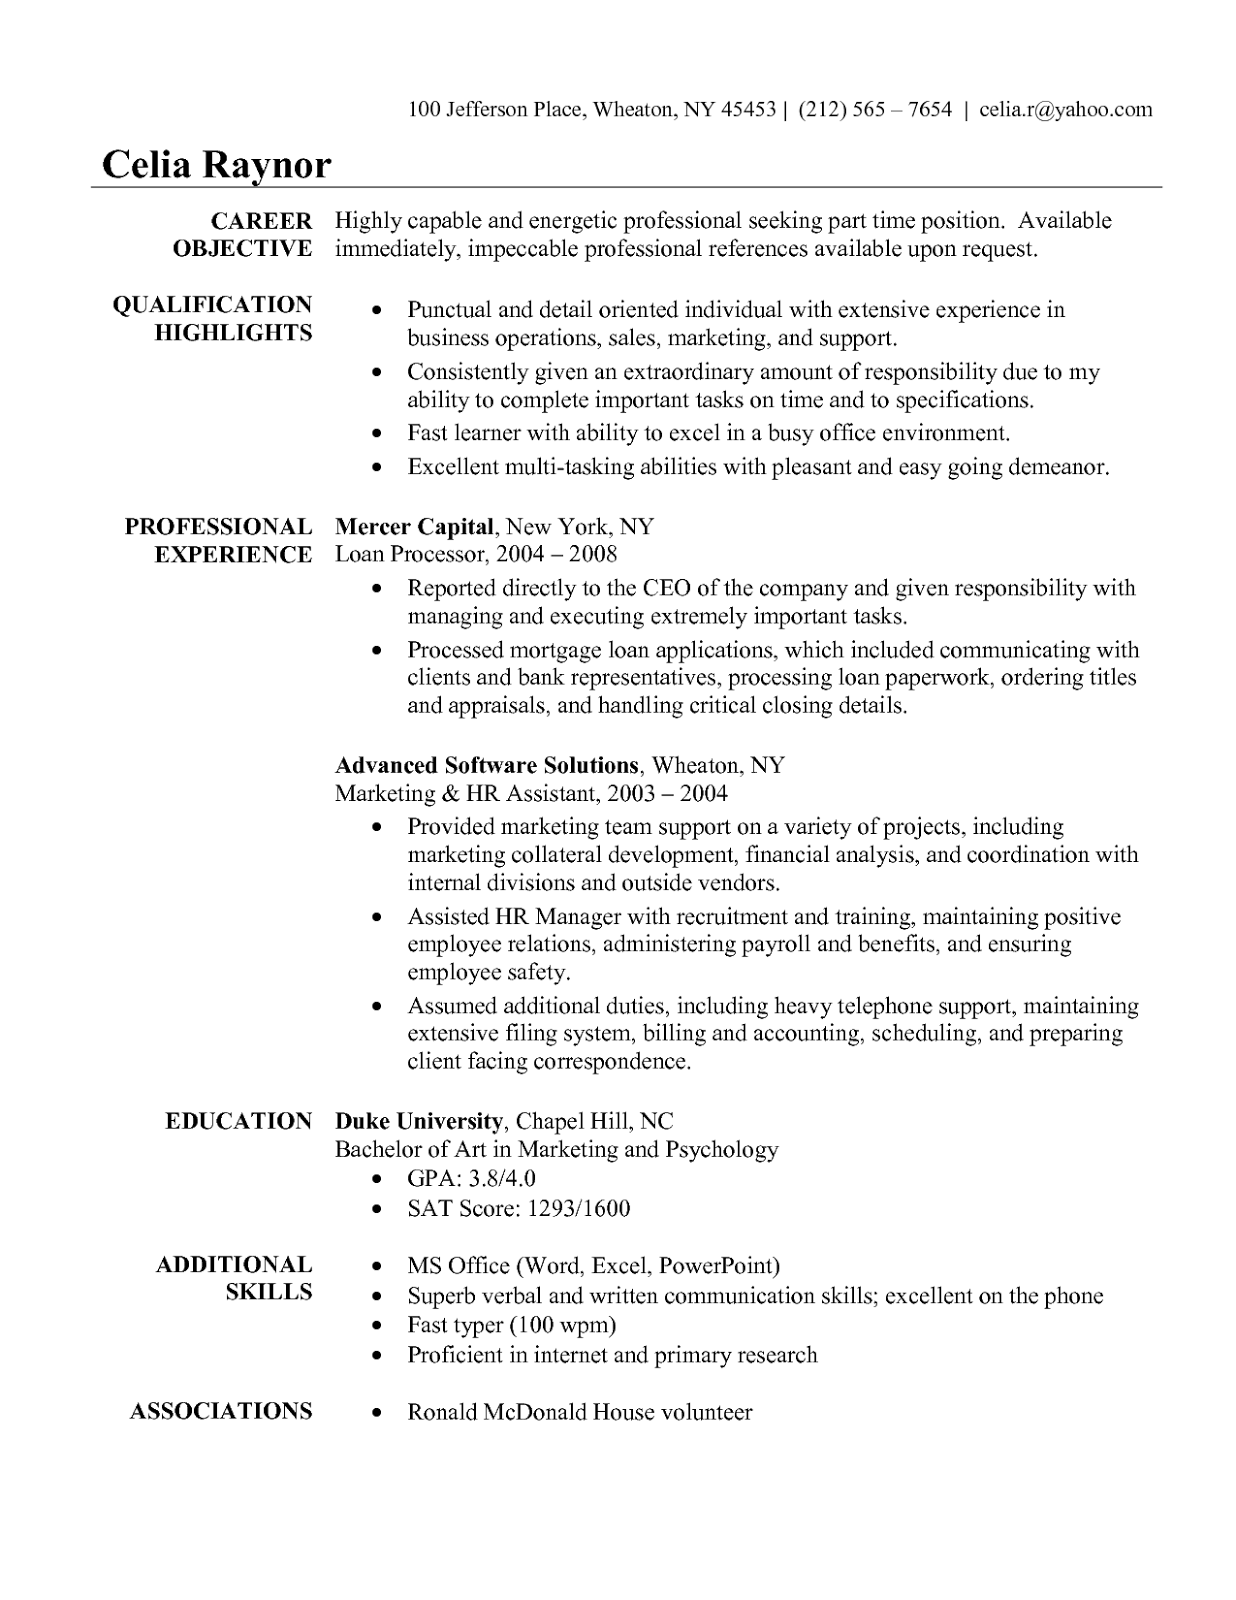 Claims resume objectives